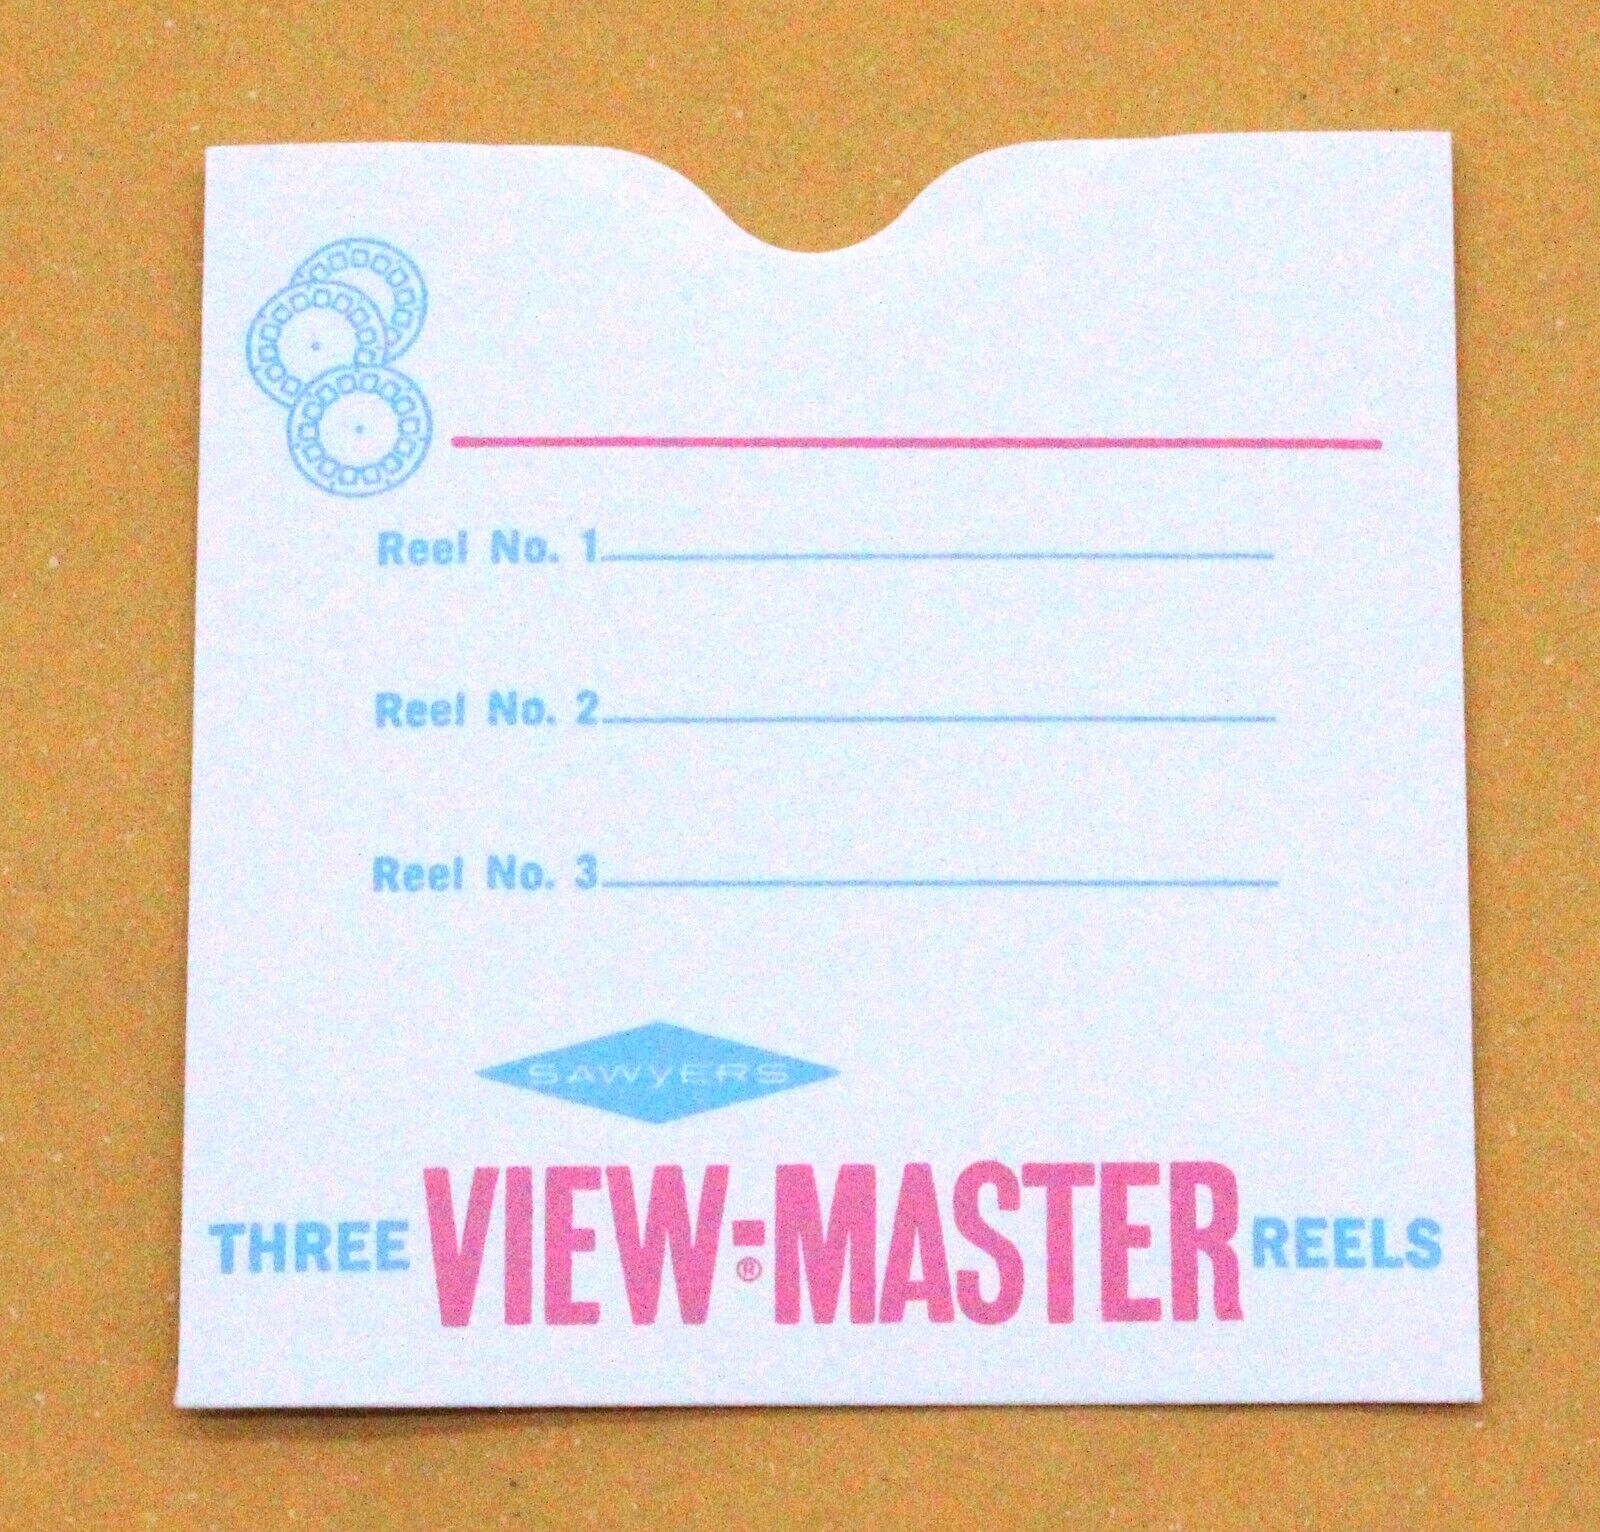  3 Reel Sleeves - View-Master Packets - Sawyer's - Packs of 25- NEW